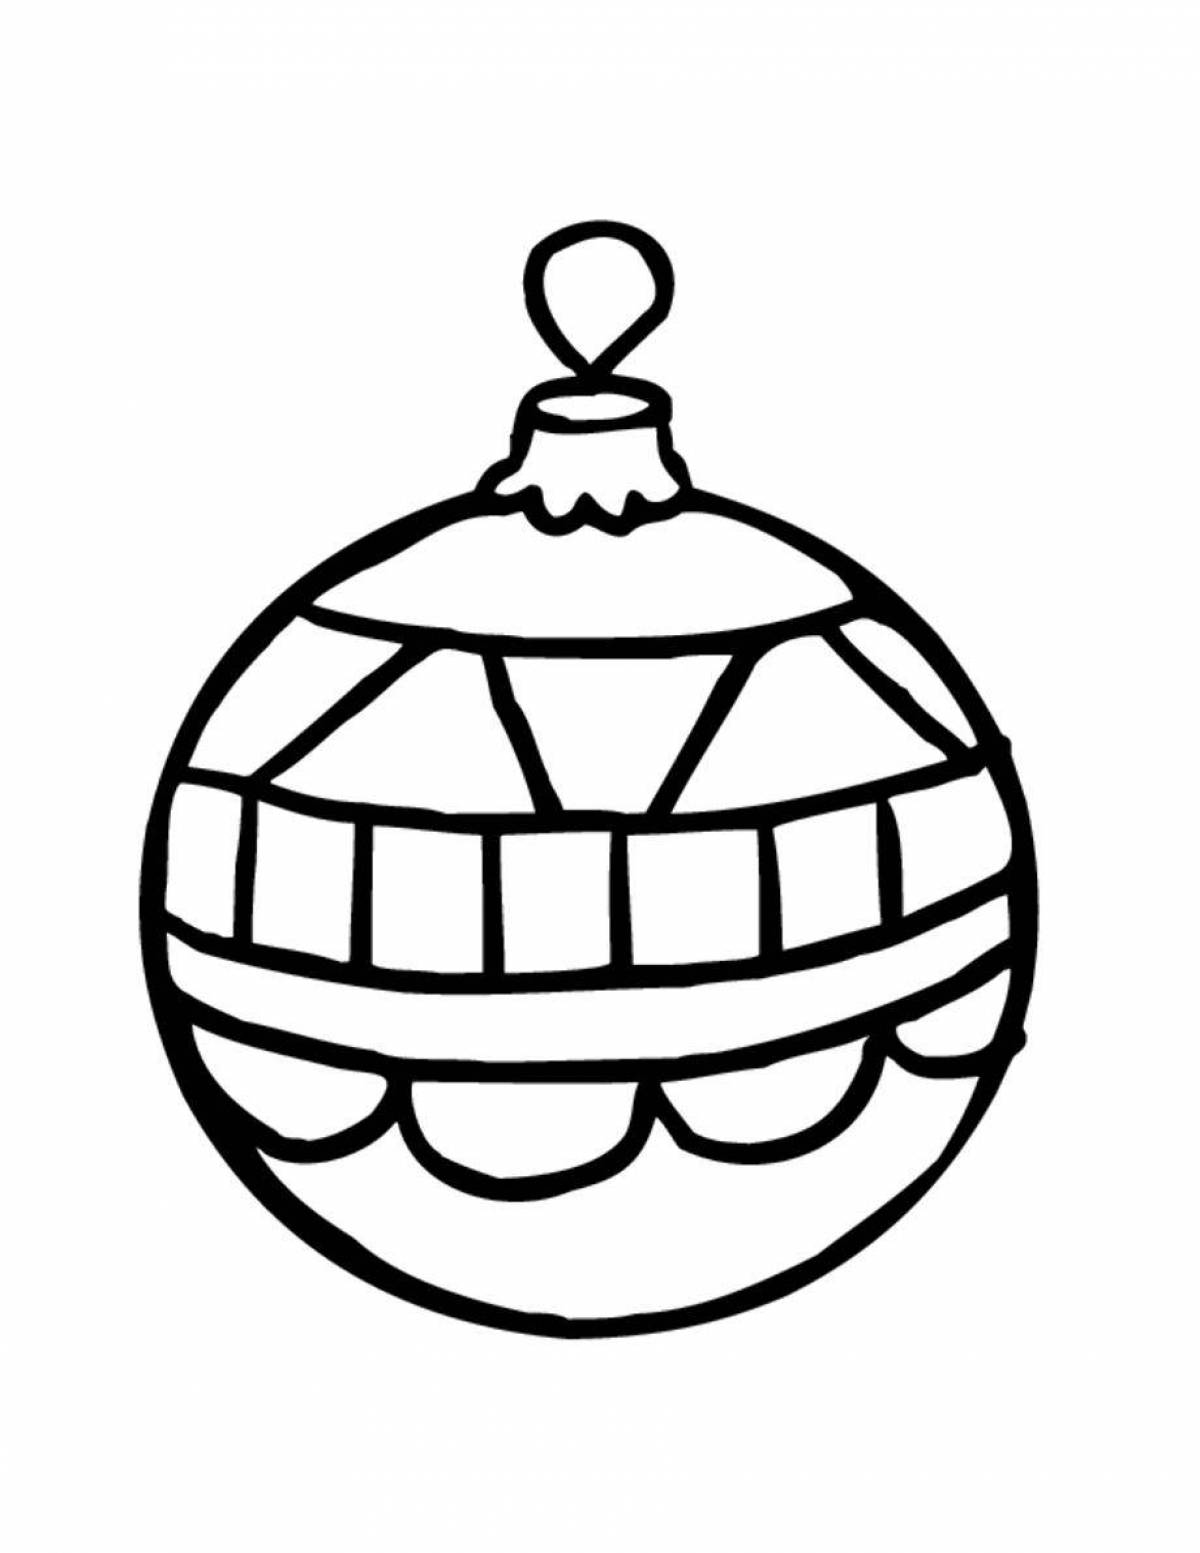 Radiant coloring page christmas ball for kids